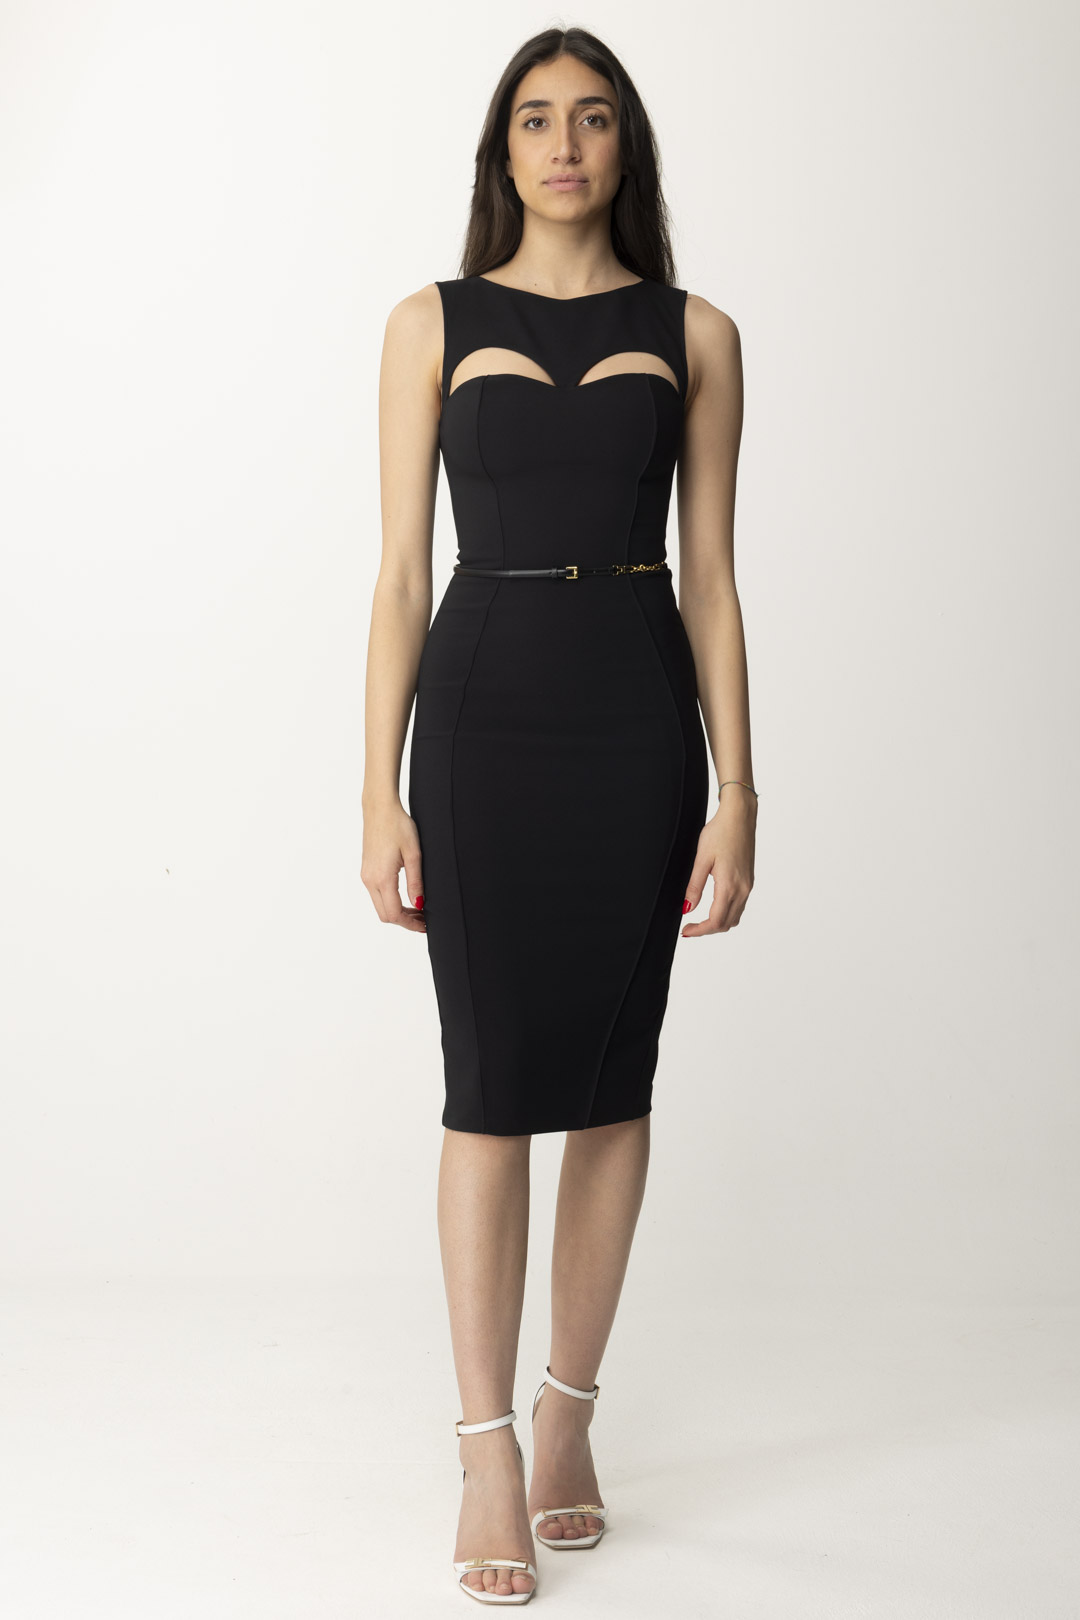 Preview: Elisabetta Franchi Sheath Dress with Belt and Cut-Out Nero